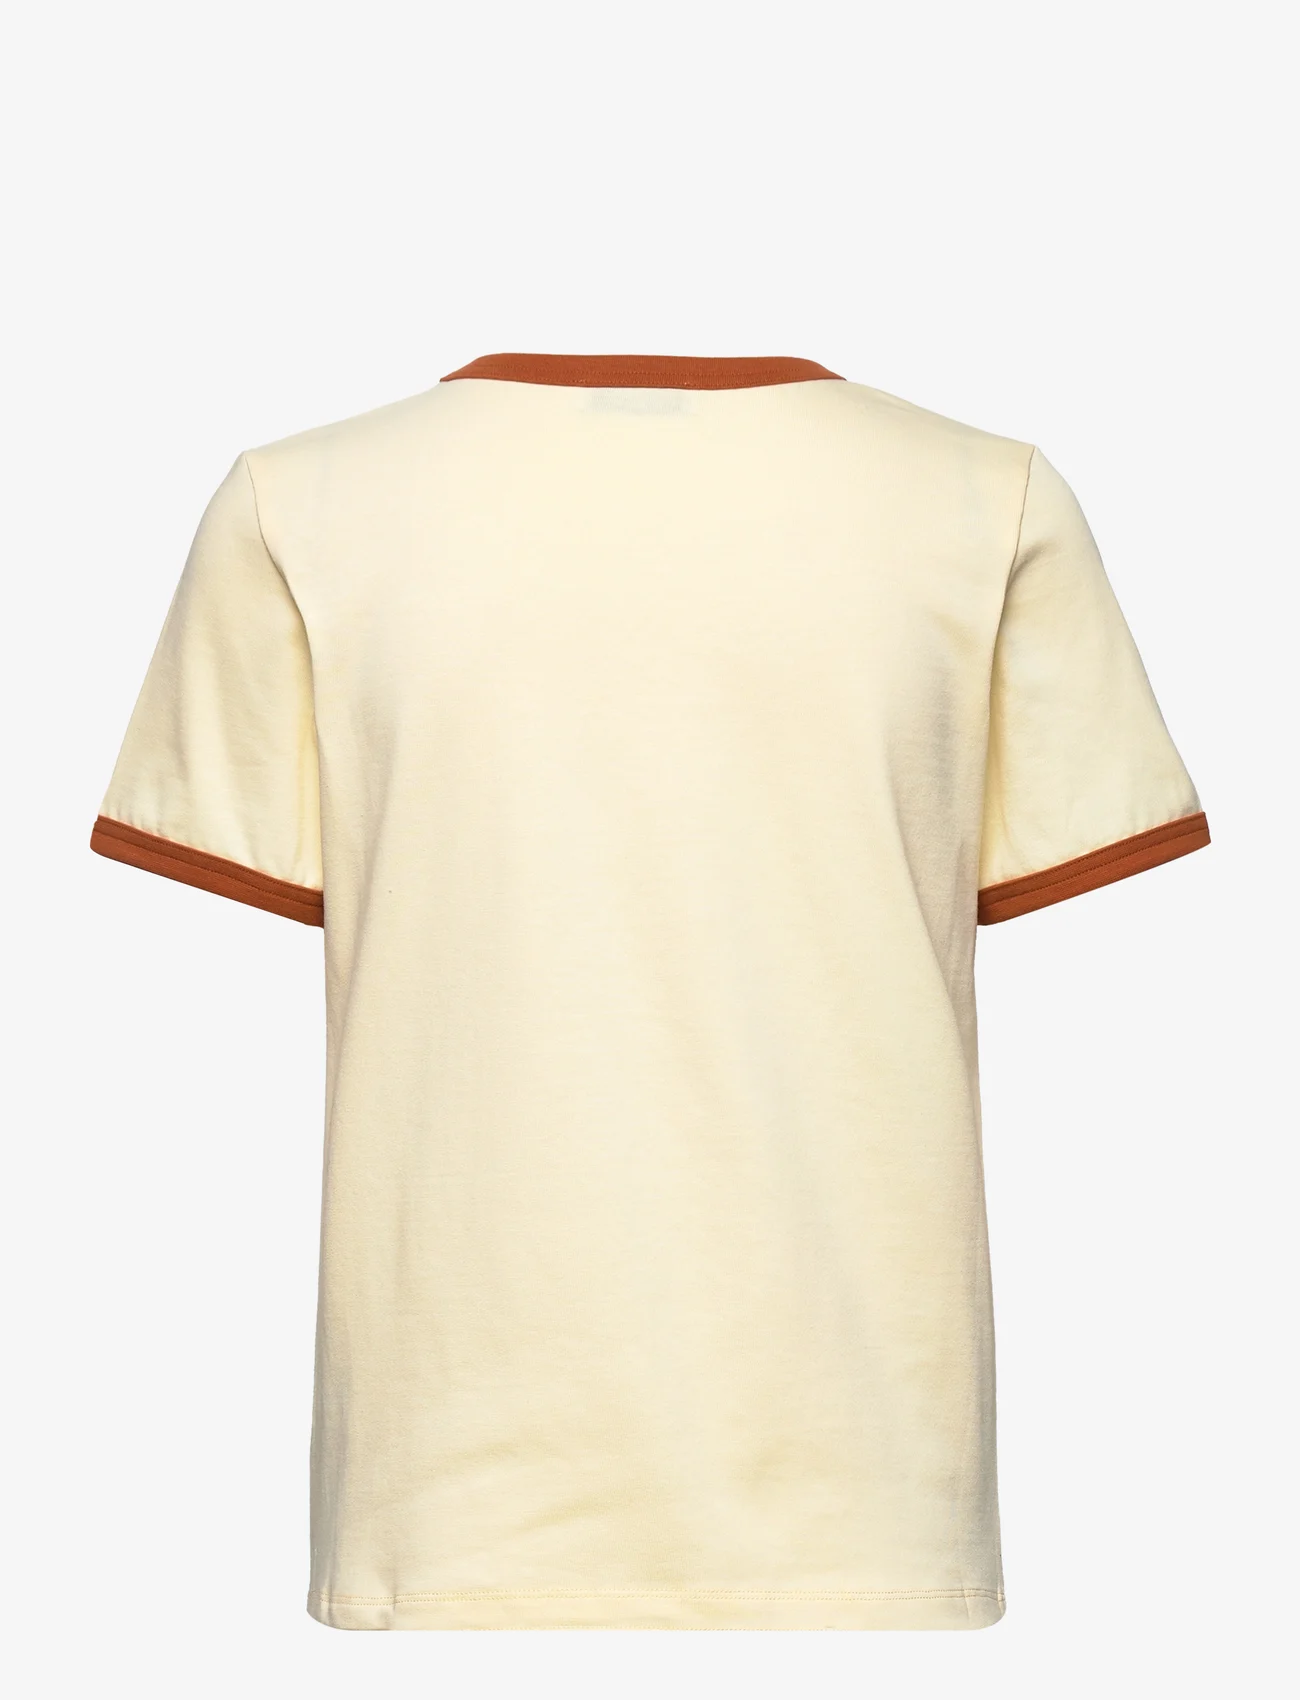 RODEBJER - Rodebjer Faye - t-shirts - almost yellow - 1